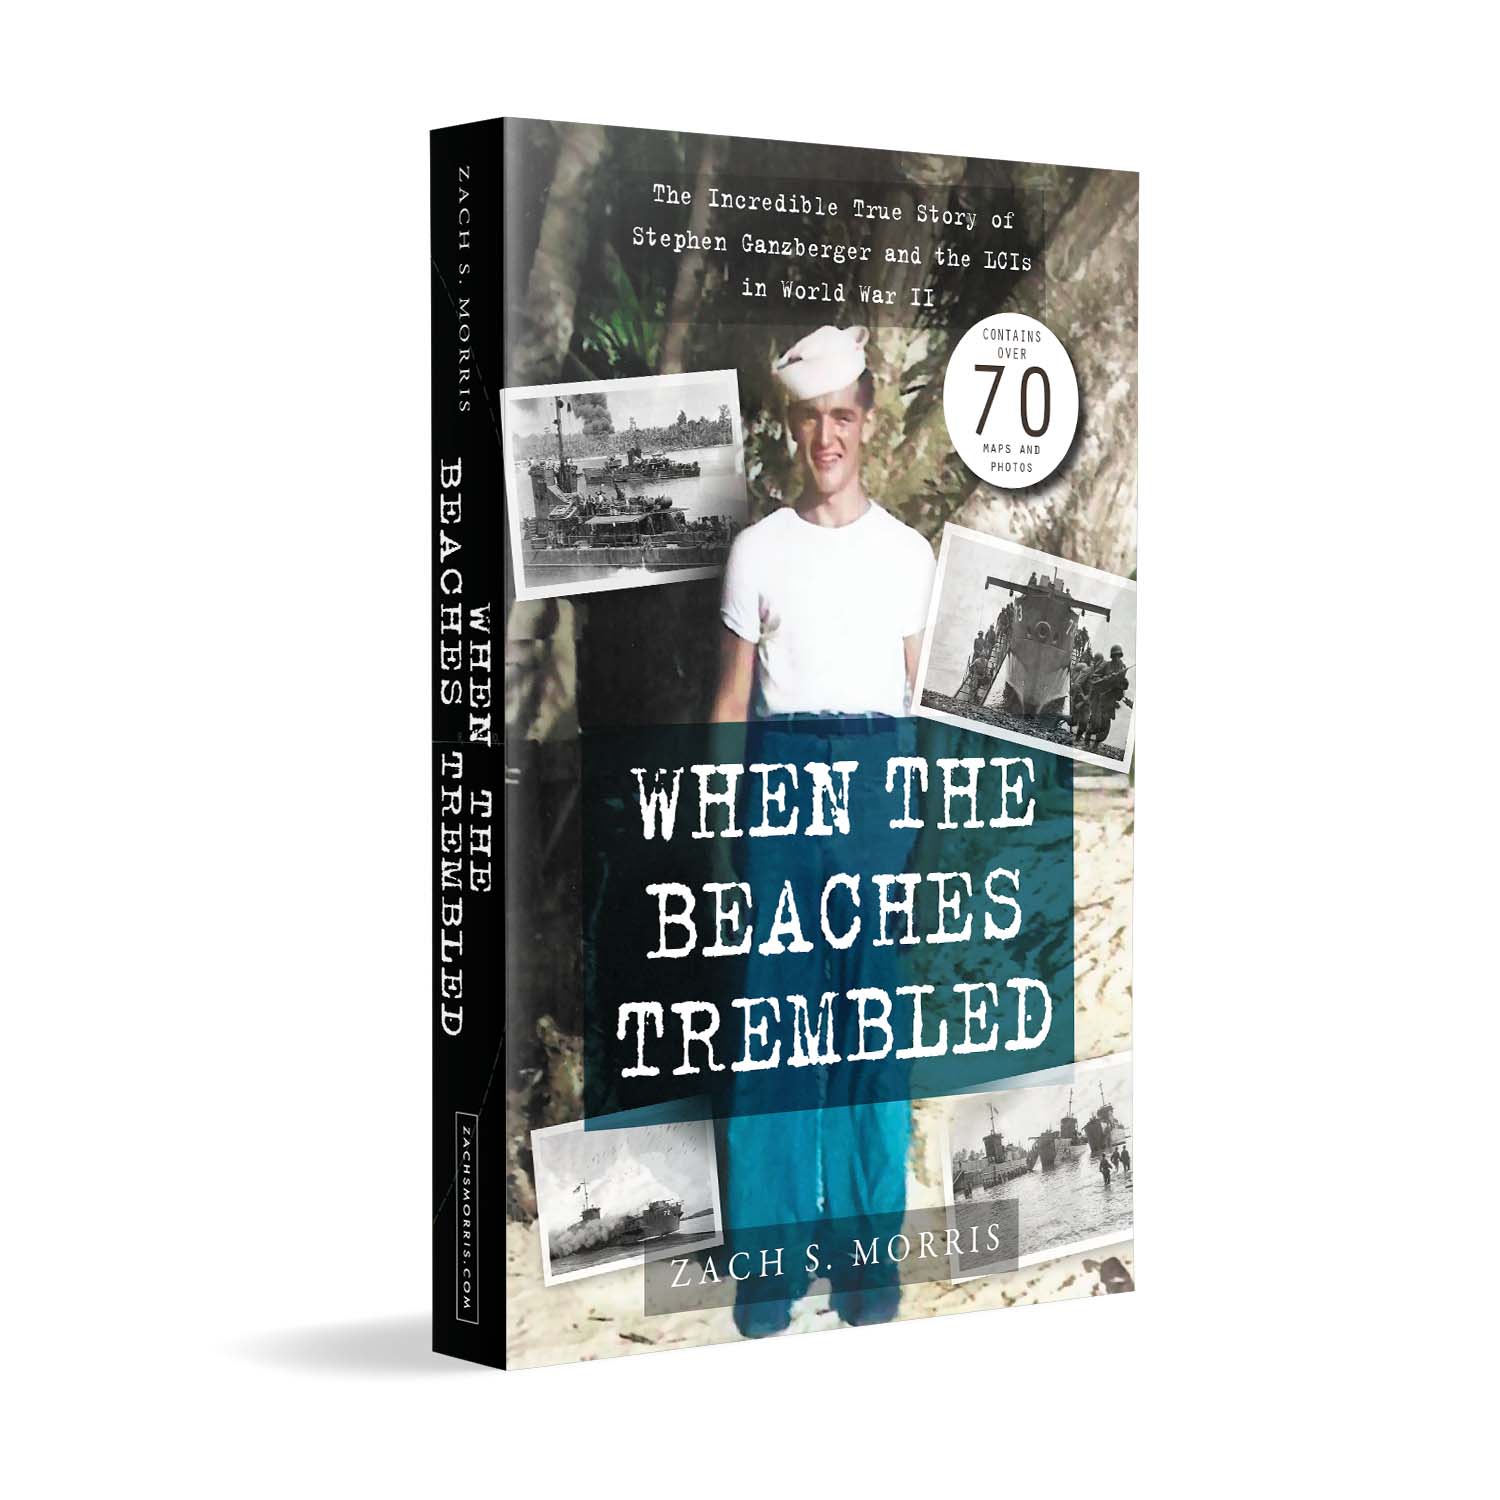 'When The Beaches Trembled' is an emotive, detailed illustrated memoir of life aboard an LCI ship during the Pacific campaigns of World War 2. The author is Zach S. Morris. The book cover was designed by Mark Thomas of coverness.com. To find out more about my book design services, please visit www.coverness.com